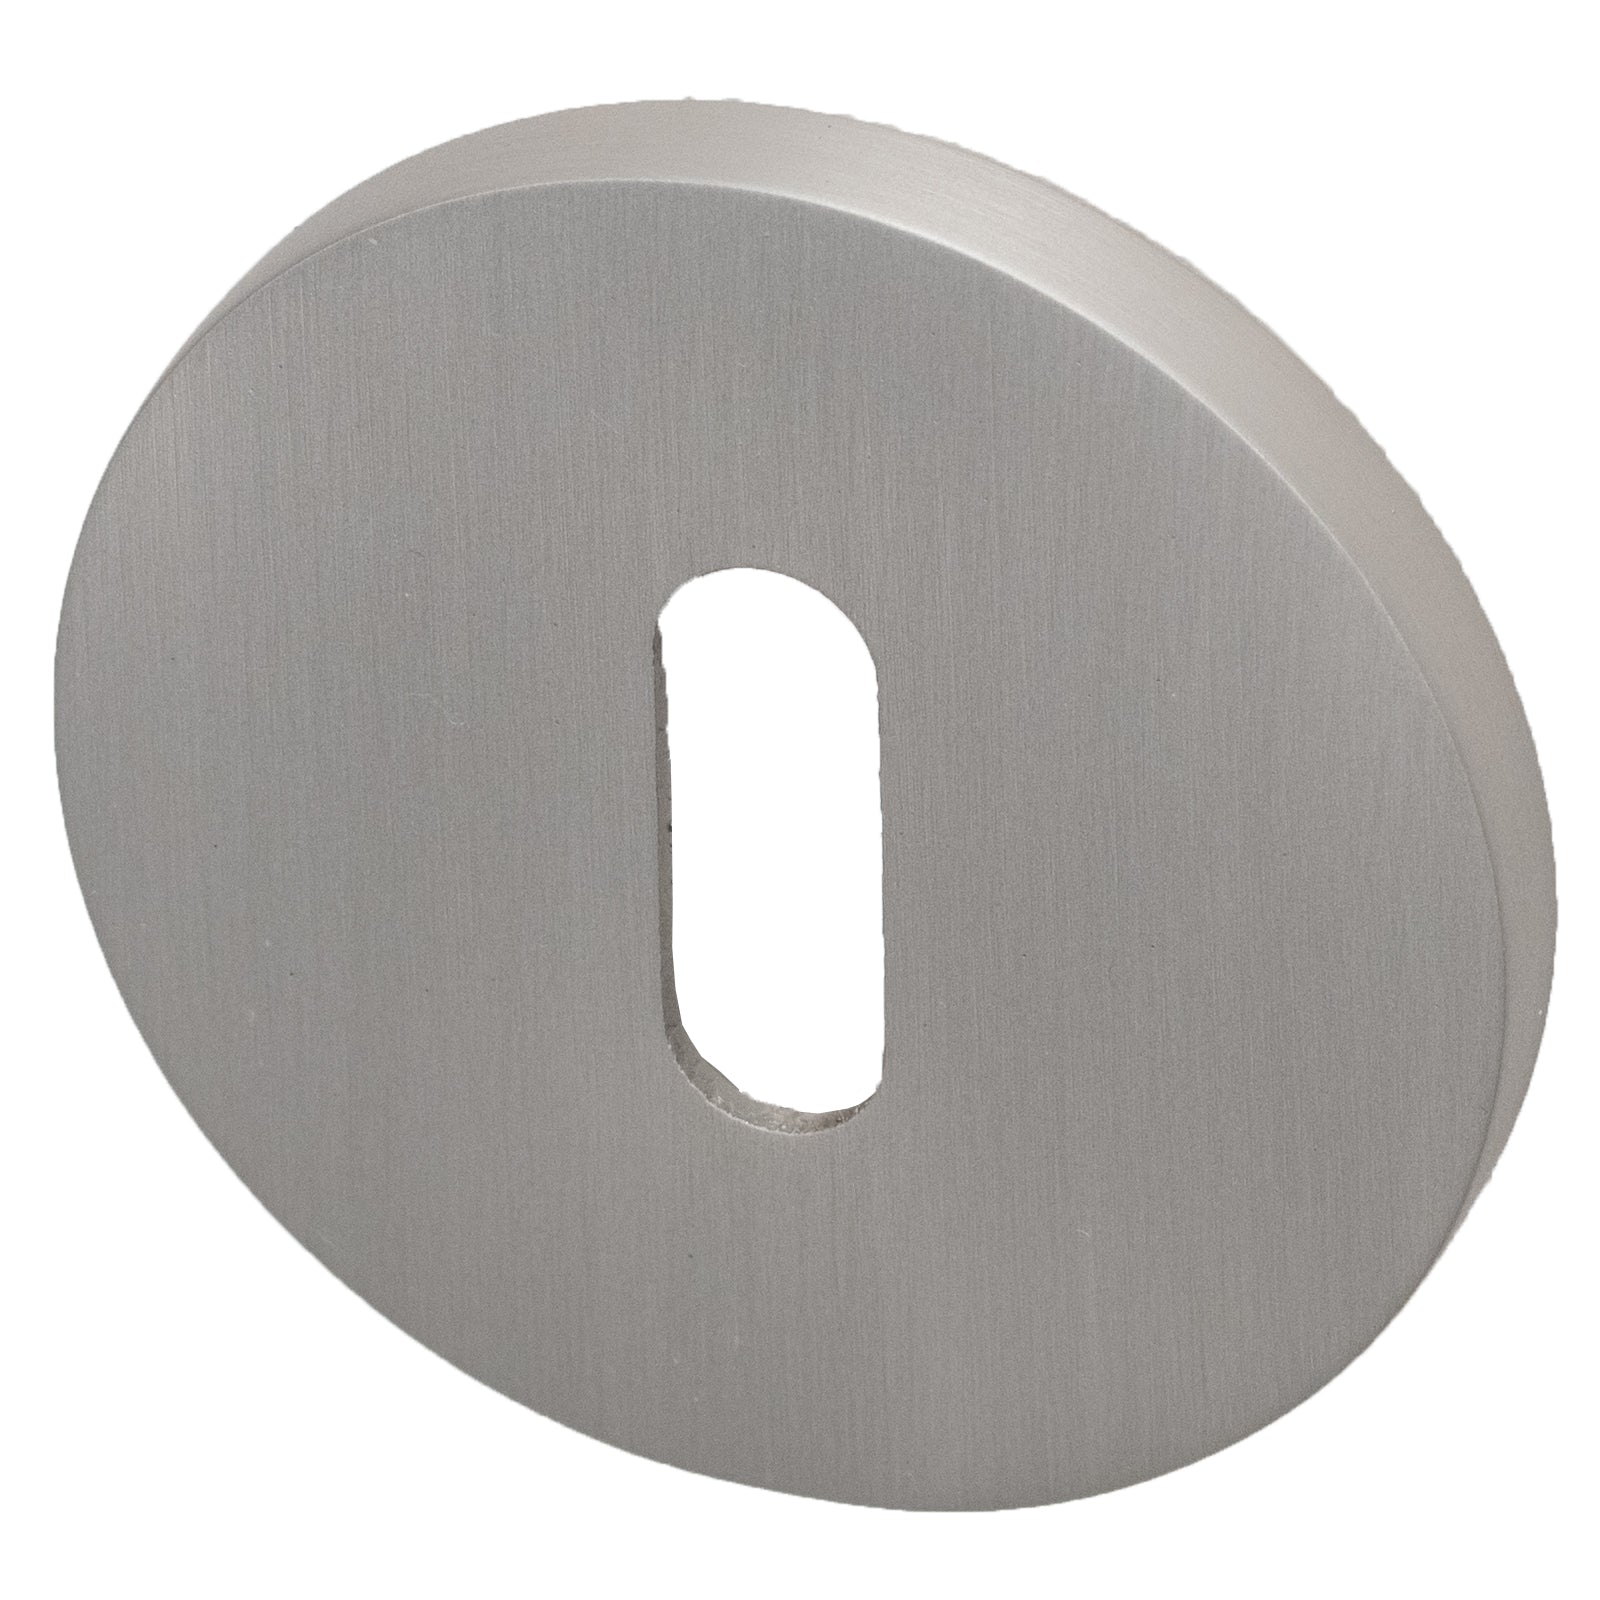 Tupai British Standard round escutcheon for use with 3 & 5 lever locks in Nickel Pearl Finish SHOW